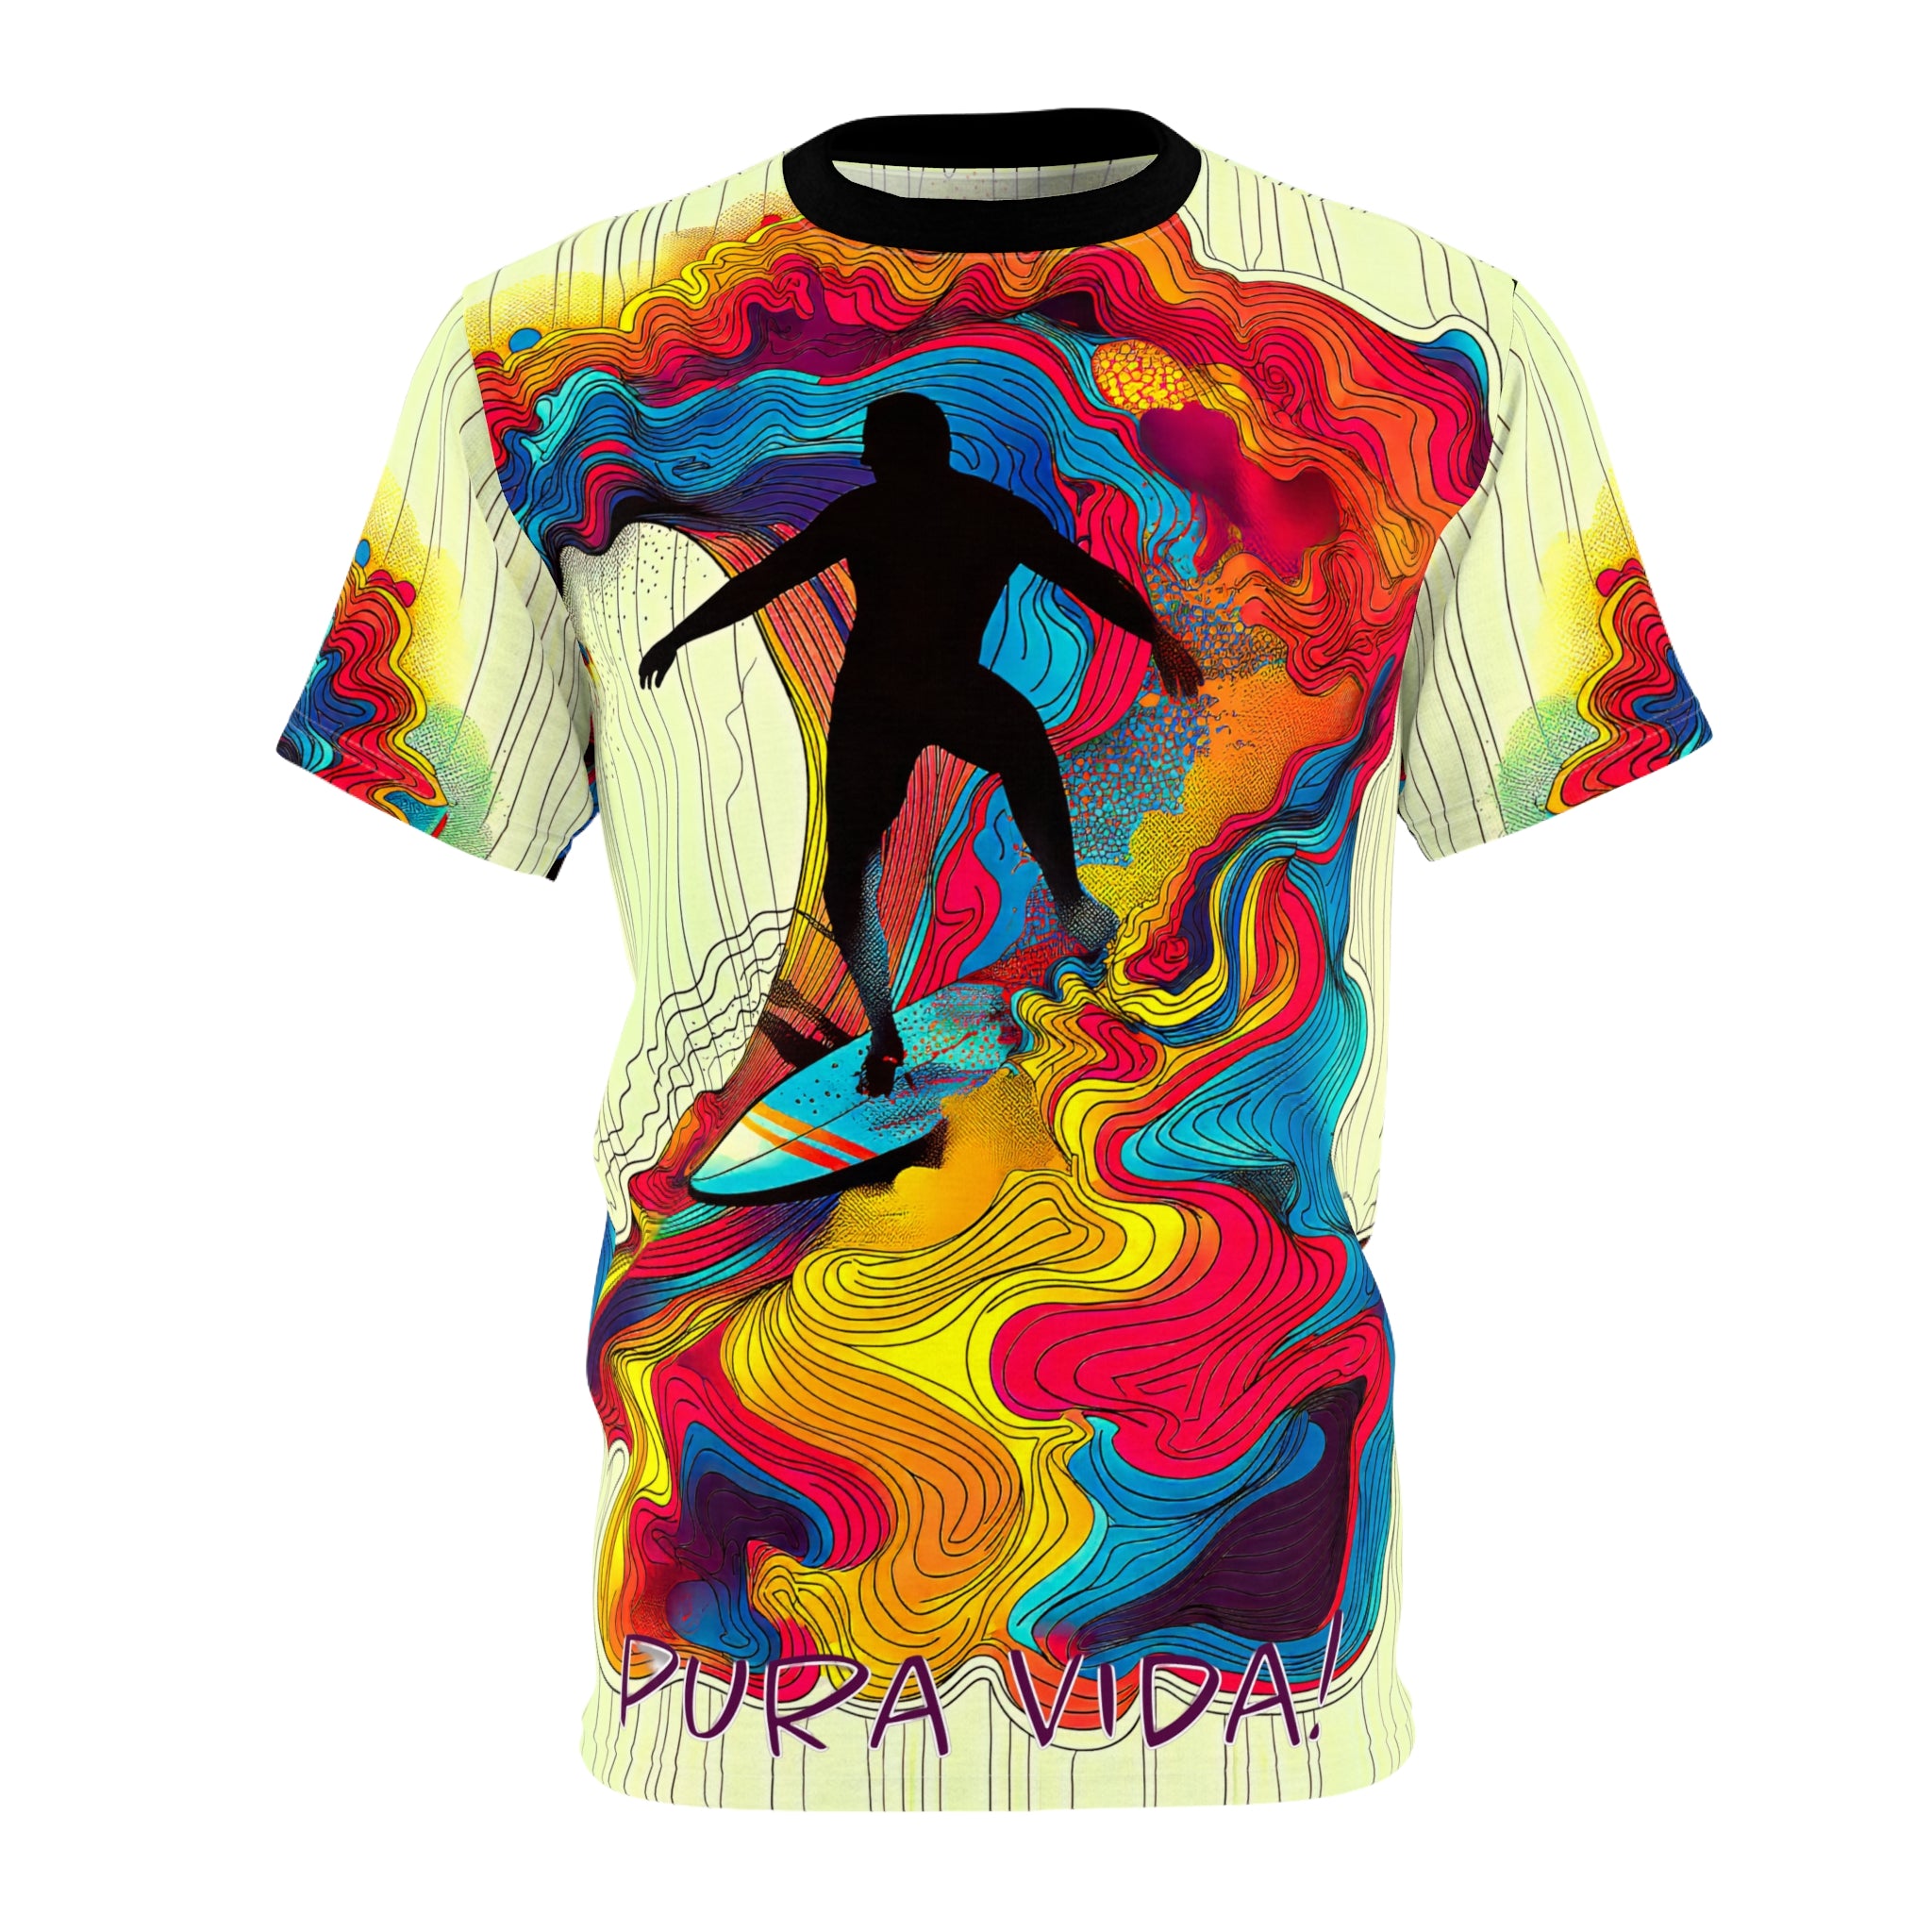 PSYCHEDELIC SURFER Unisex T-Shirt